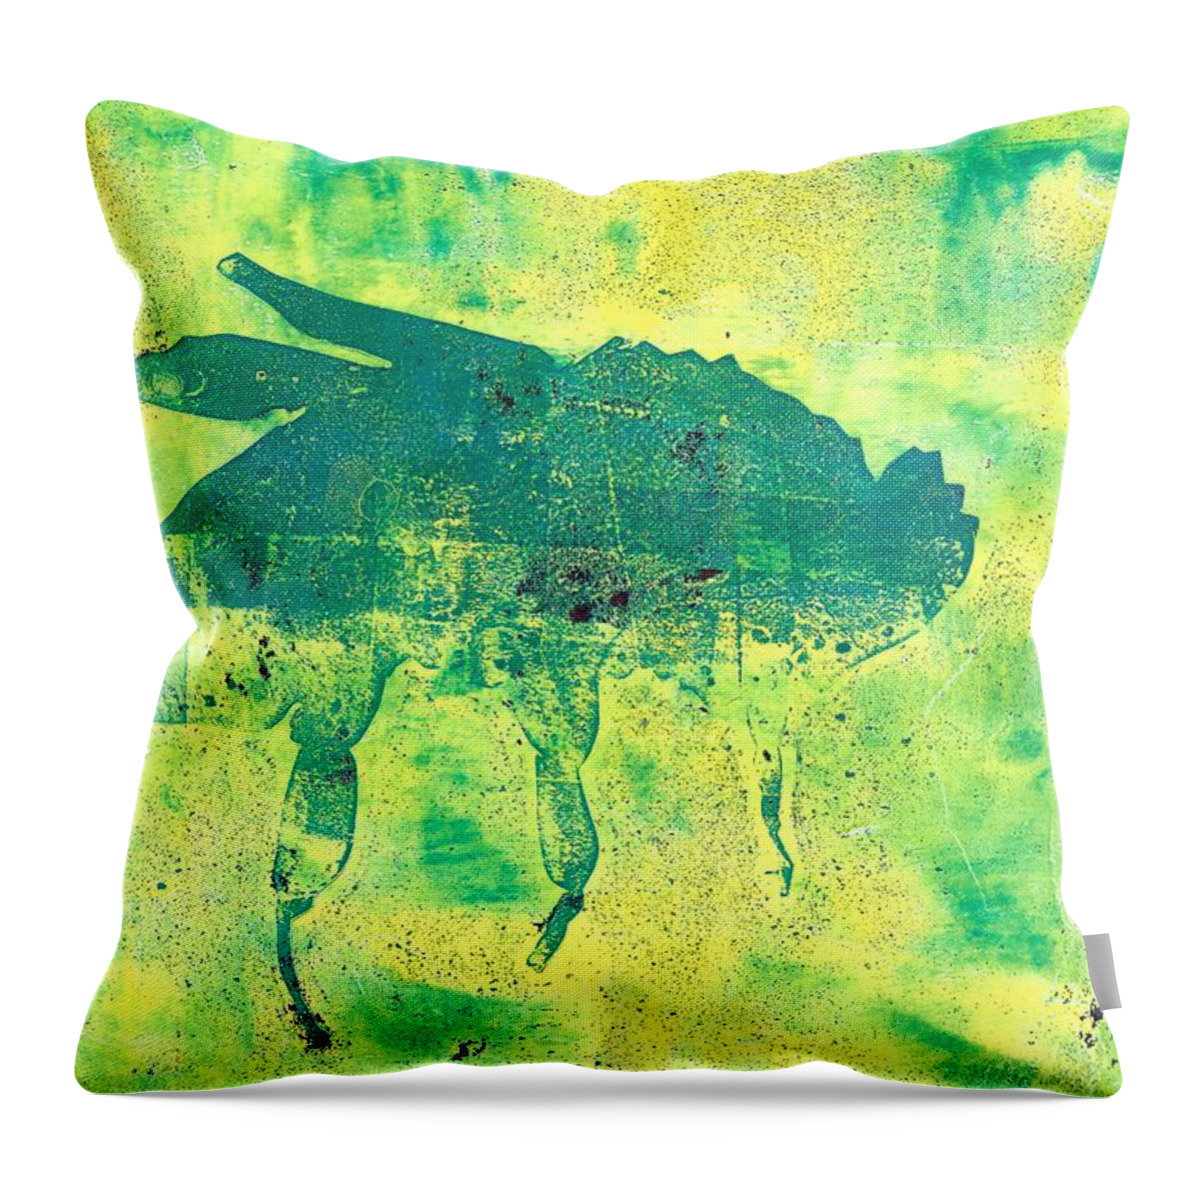 Bee Throw Pillow featuring the painting Bee by Ruth Kamenev